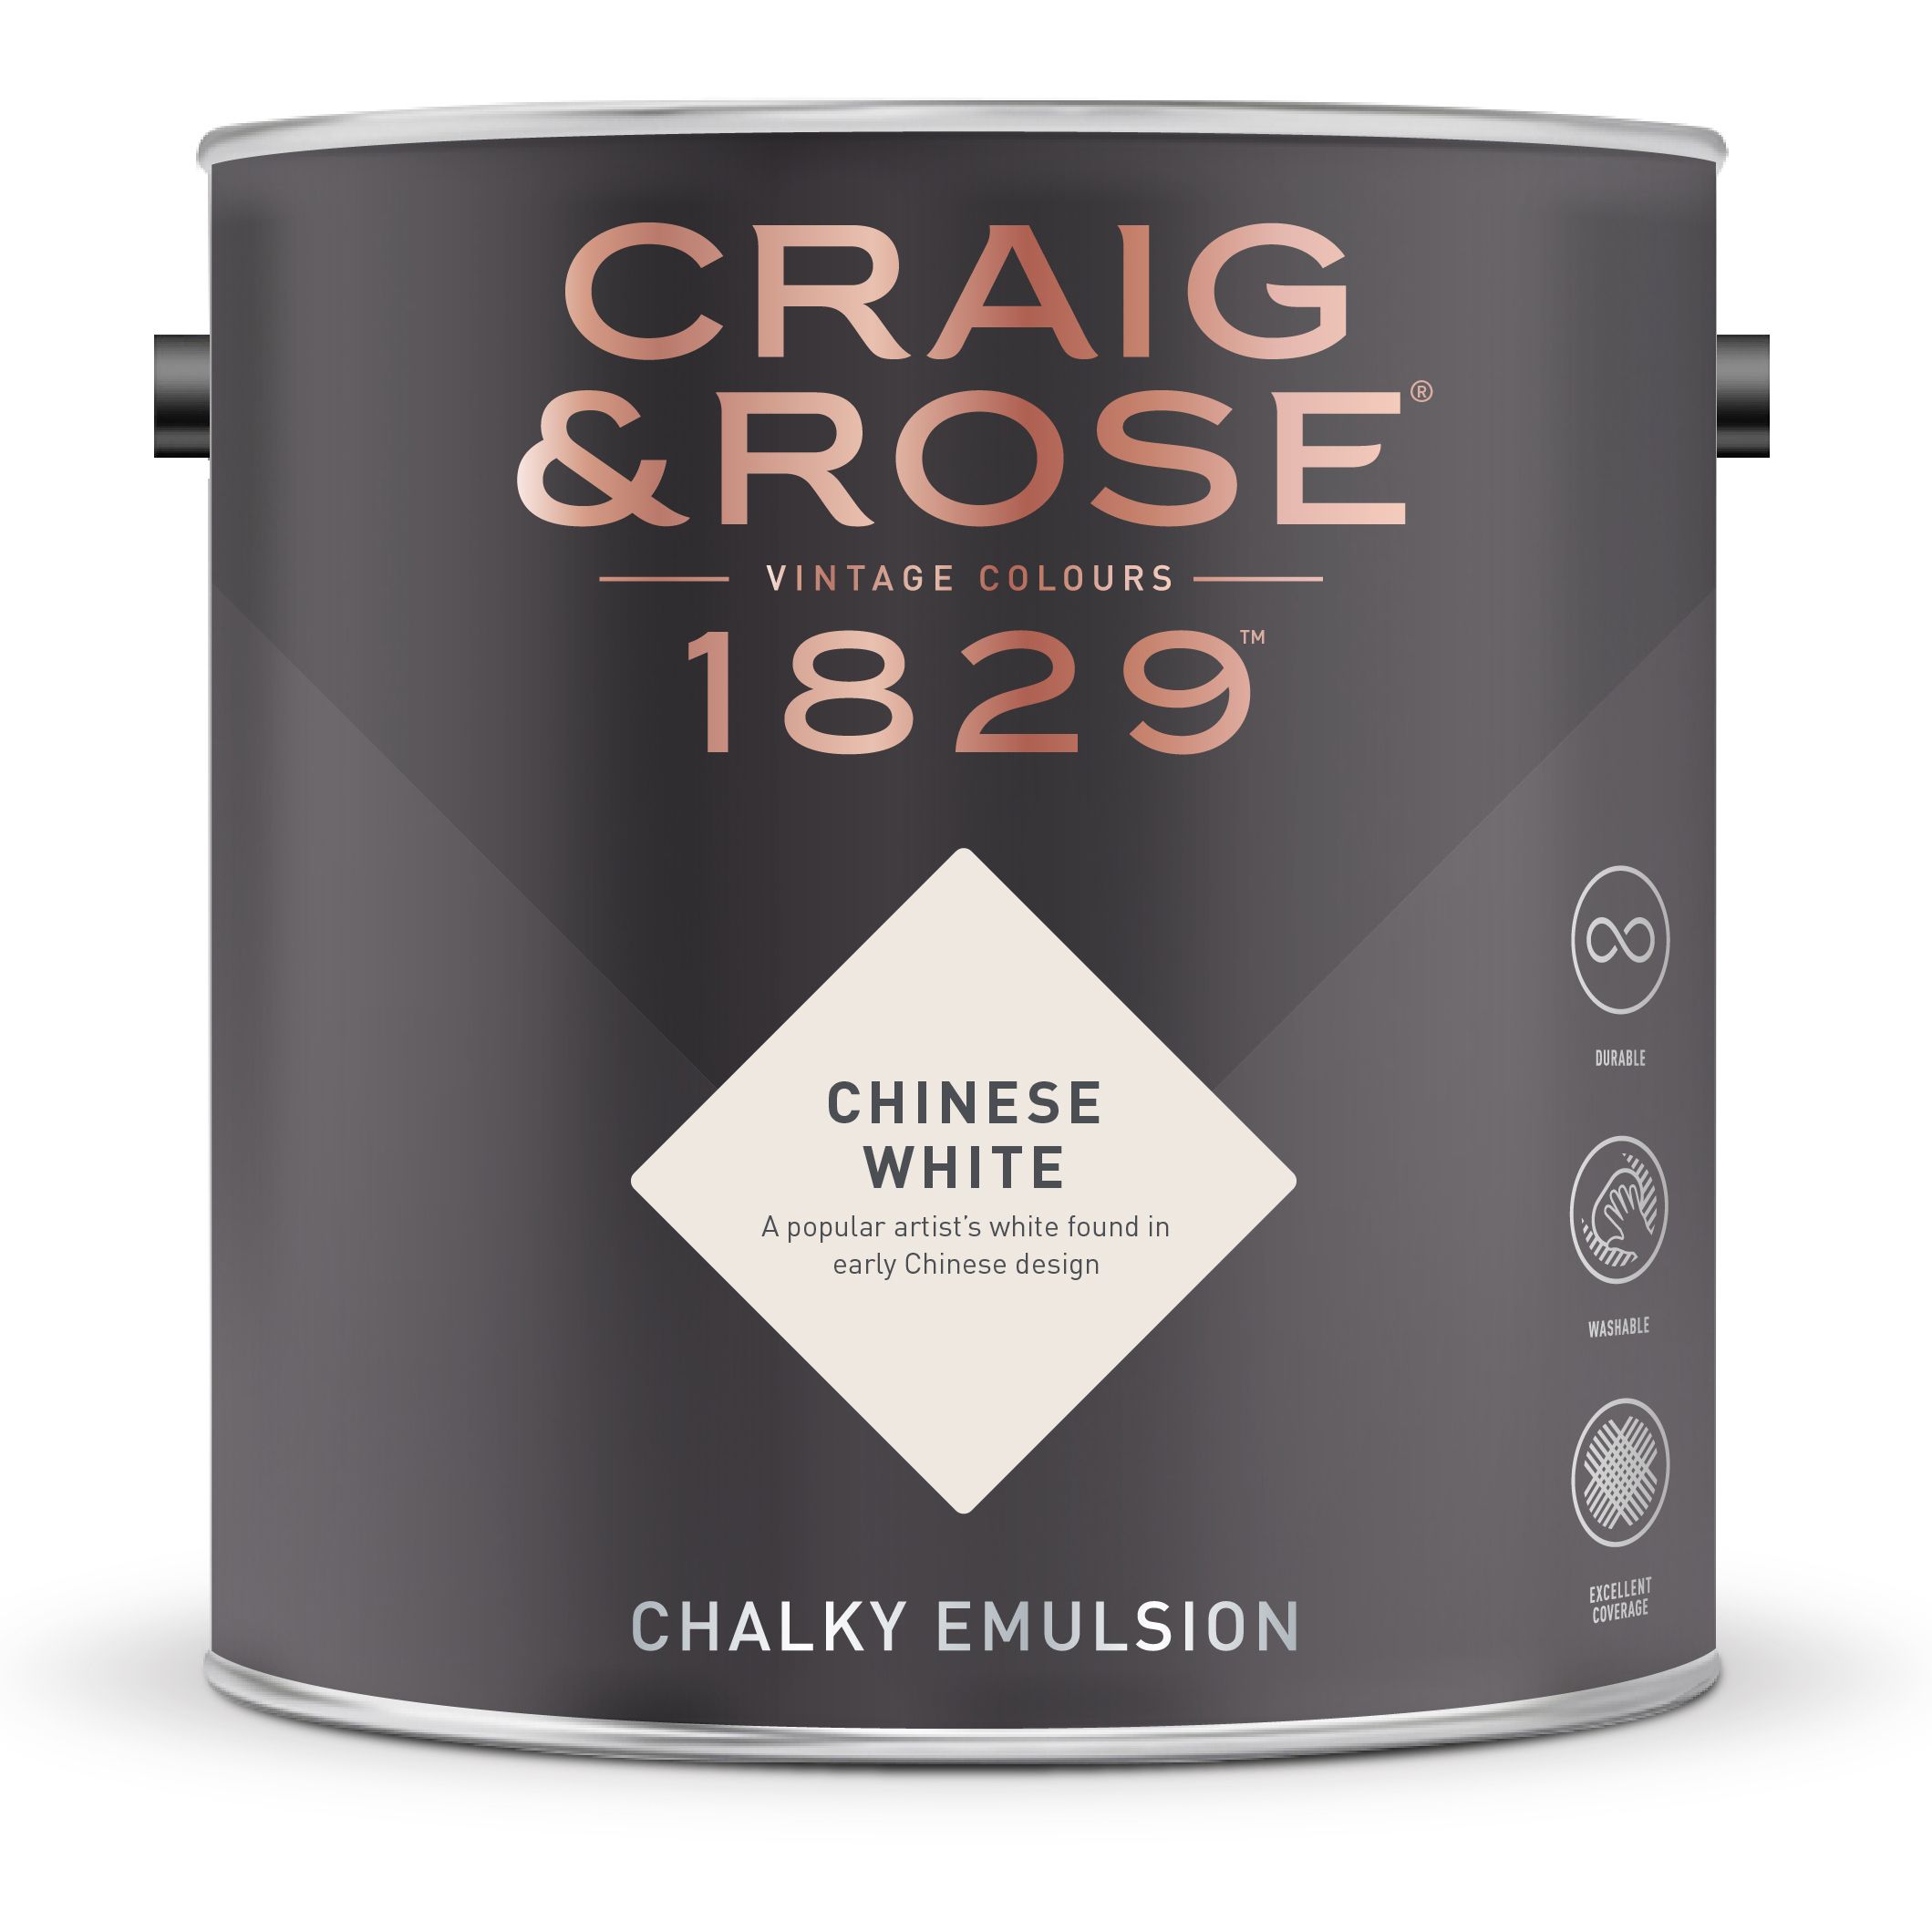 Craig & Rose 1829 Chinese White Chalky Emulsion paint, 2.5L